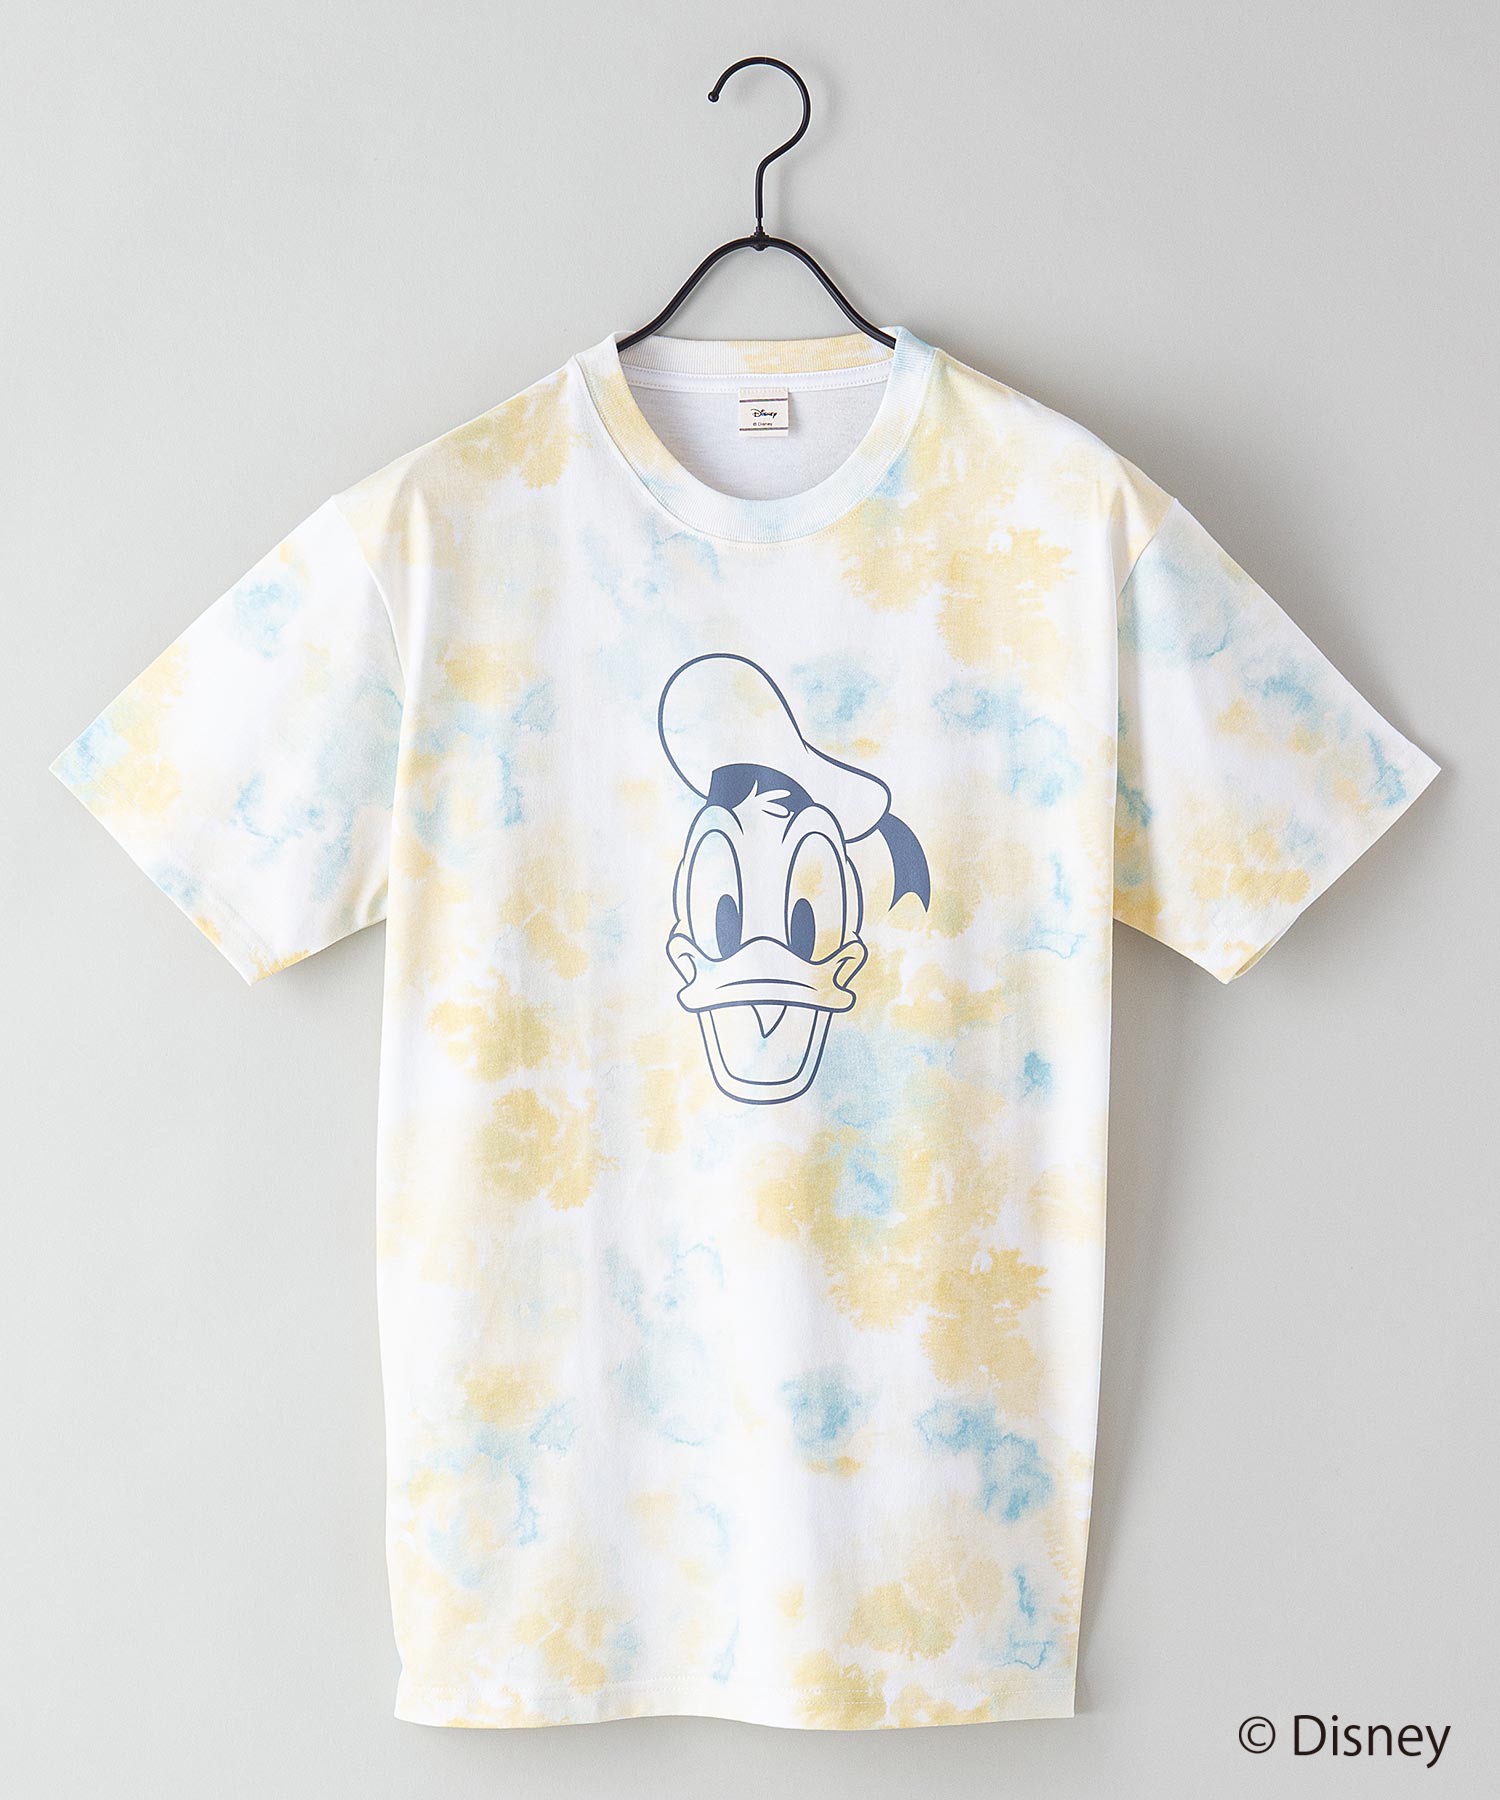 Disney ディズニー タイダイｔシャツ Outdoor Products Apparel アウトドアプロダクツ Outdoor Products 公式通販サイト